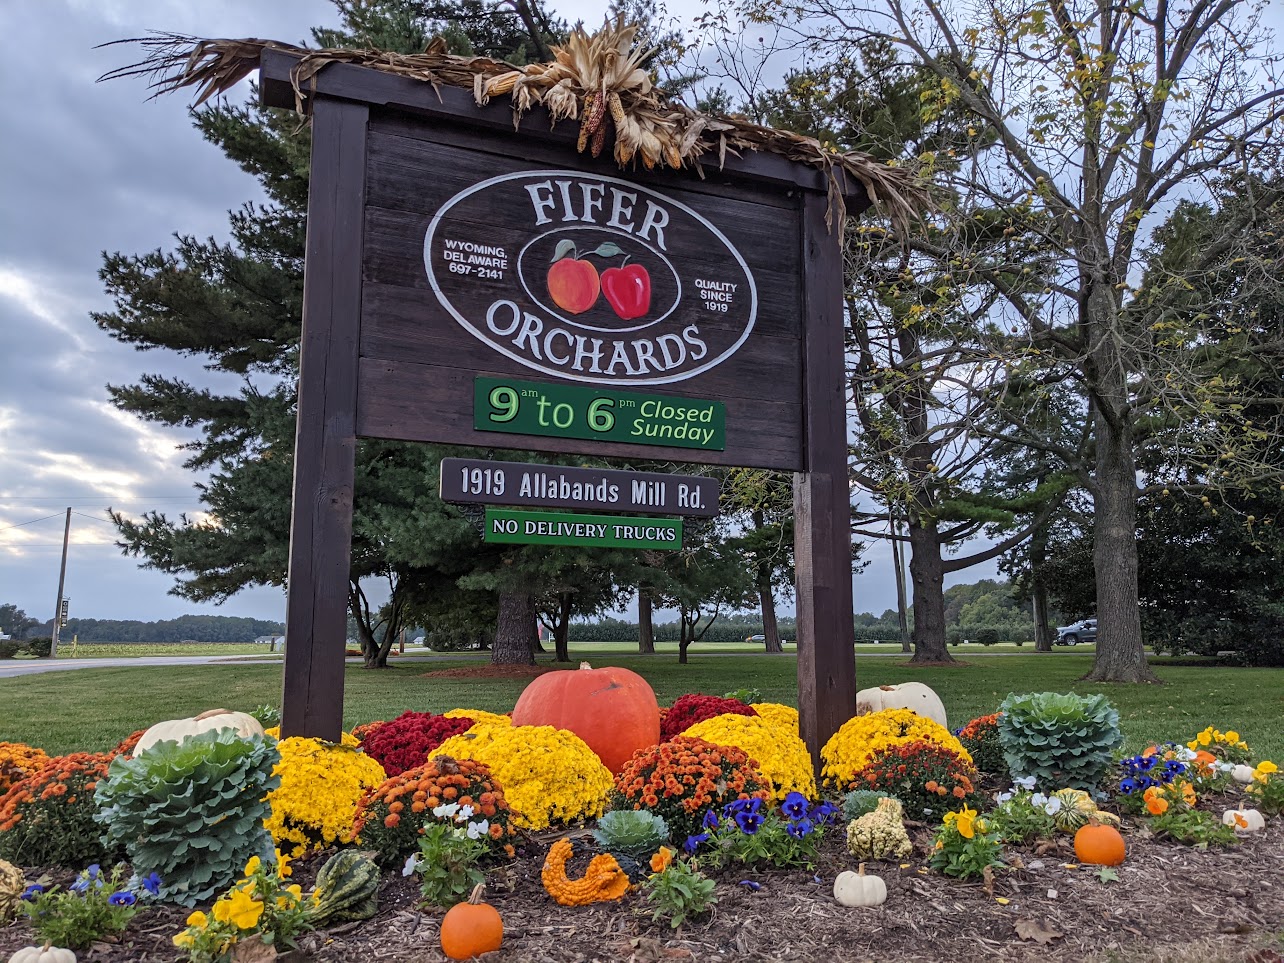 Fifer Orchards Farm and Country Store